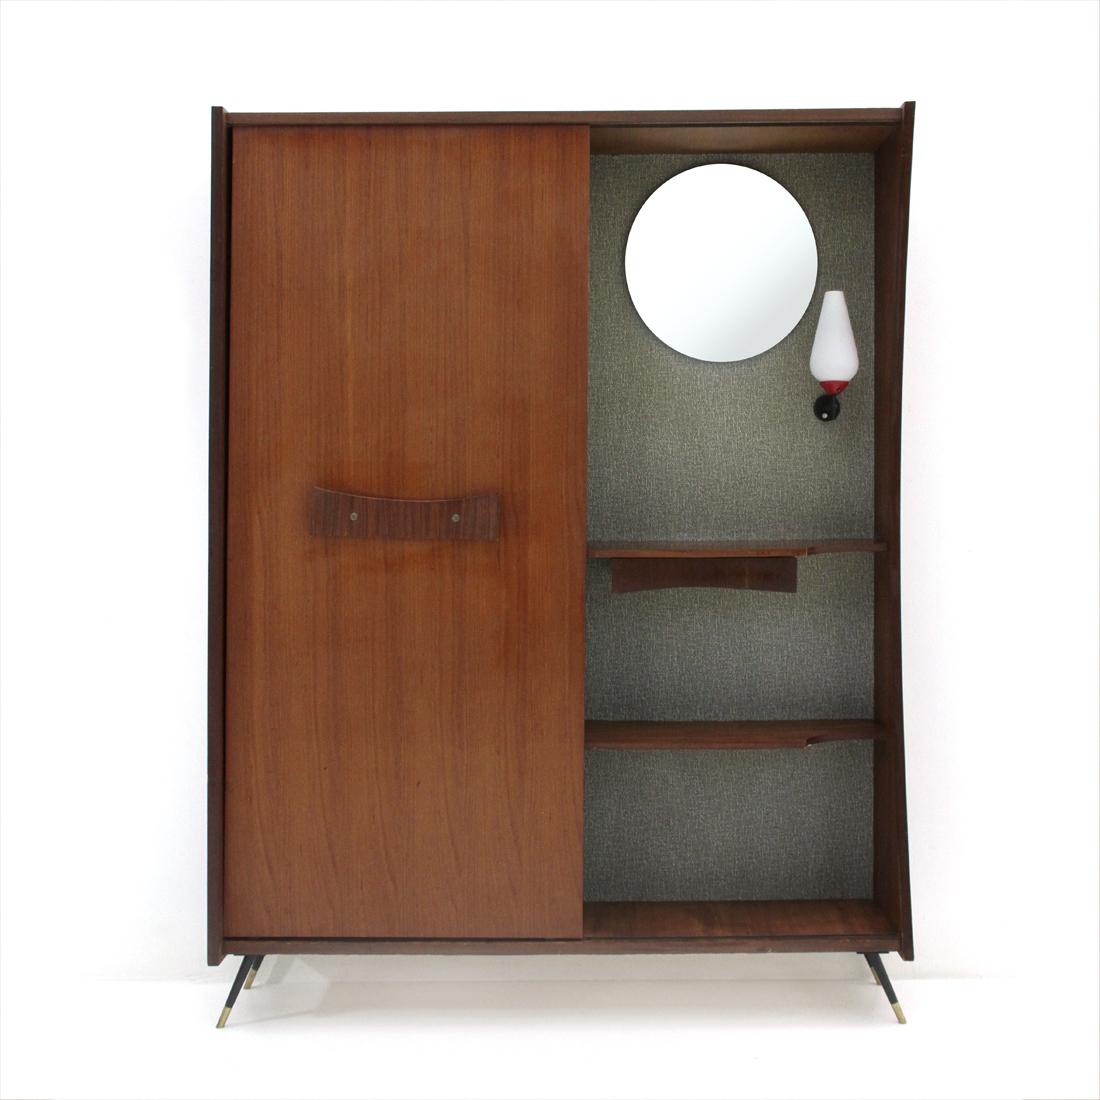 Italian Mid-Century Modern Cabinet with Mirror and Light, 1950s